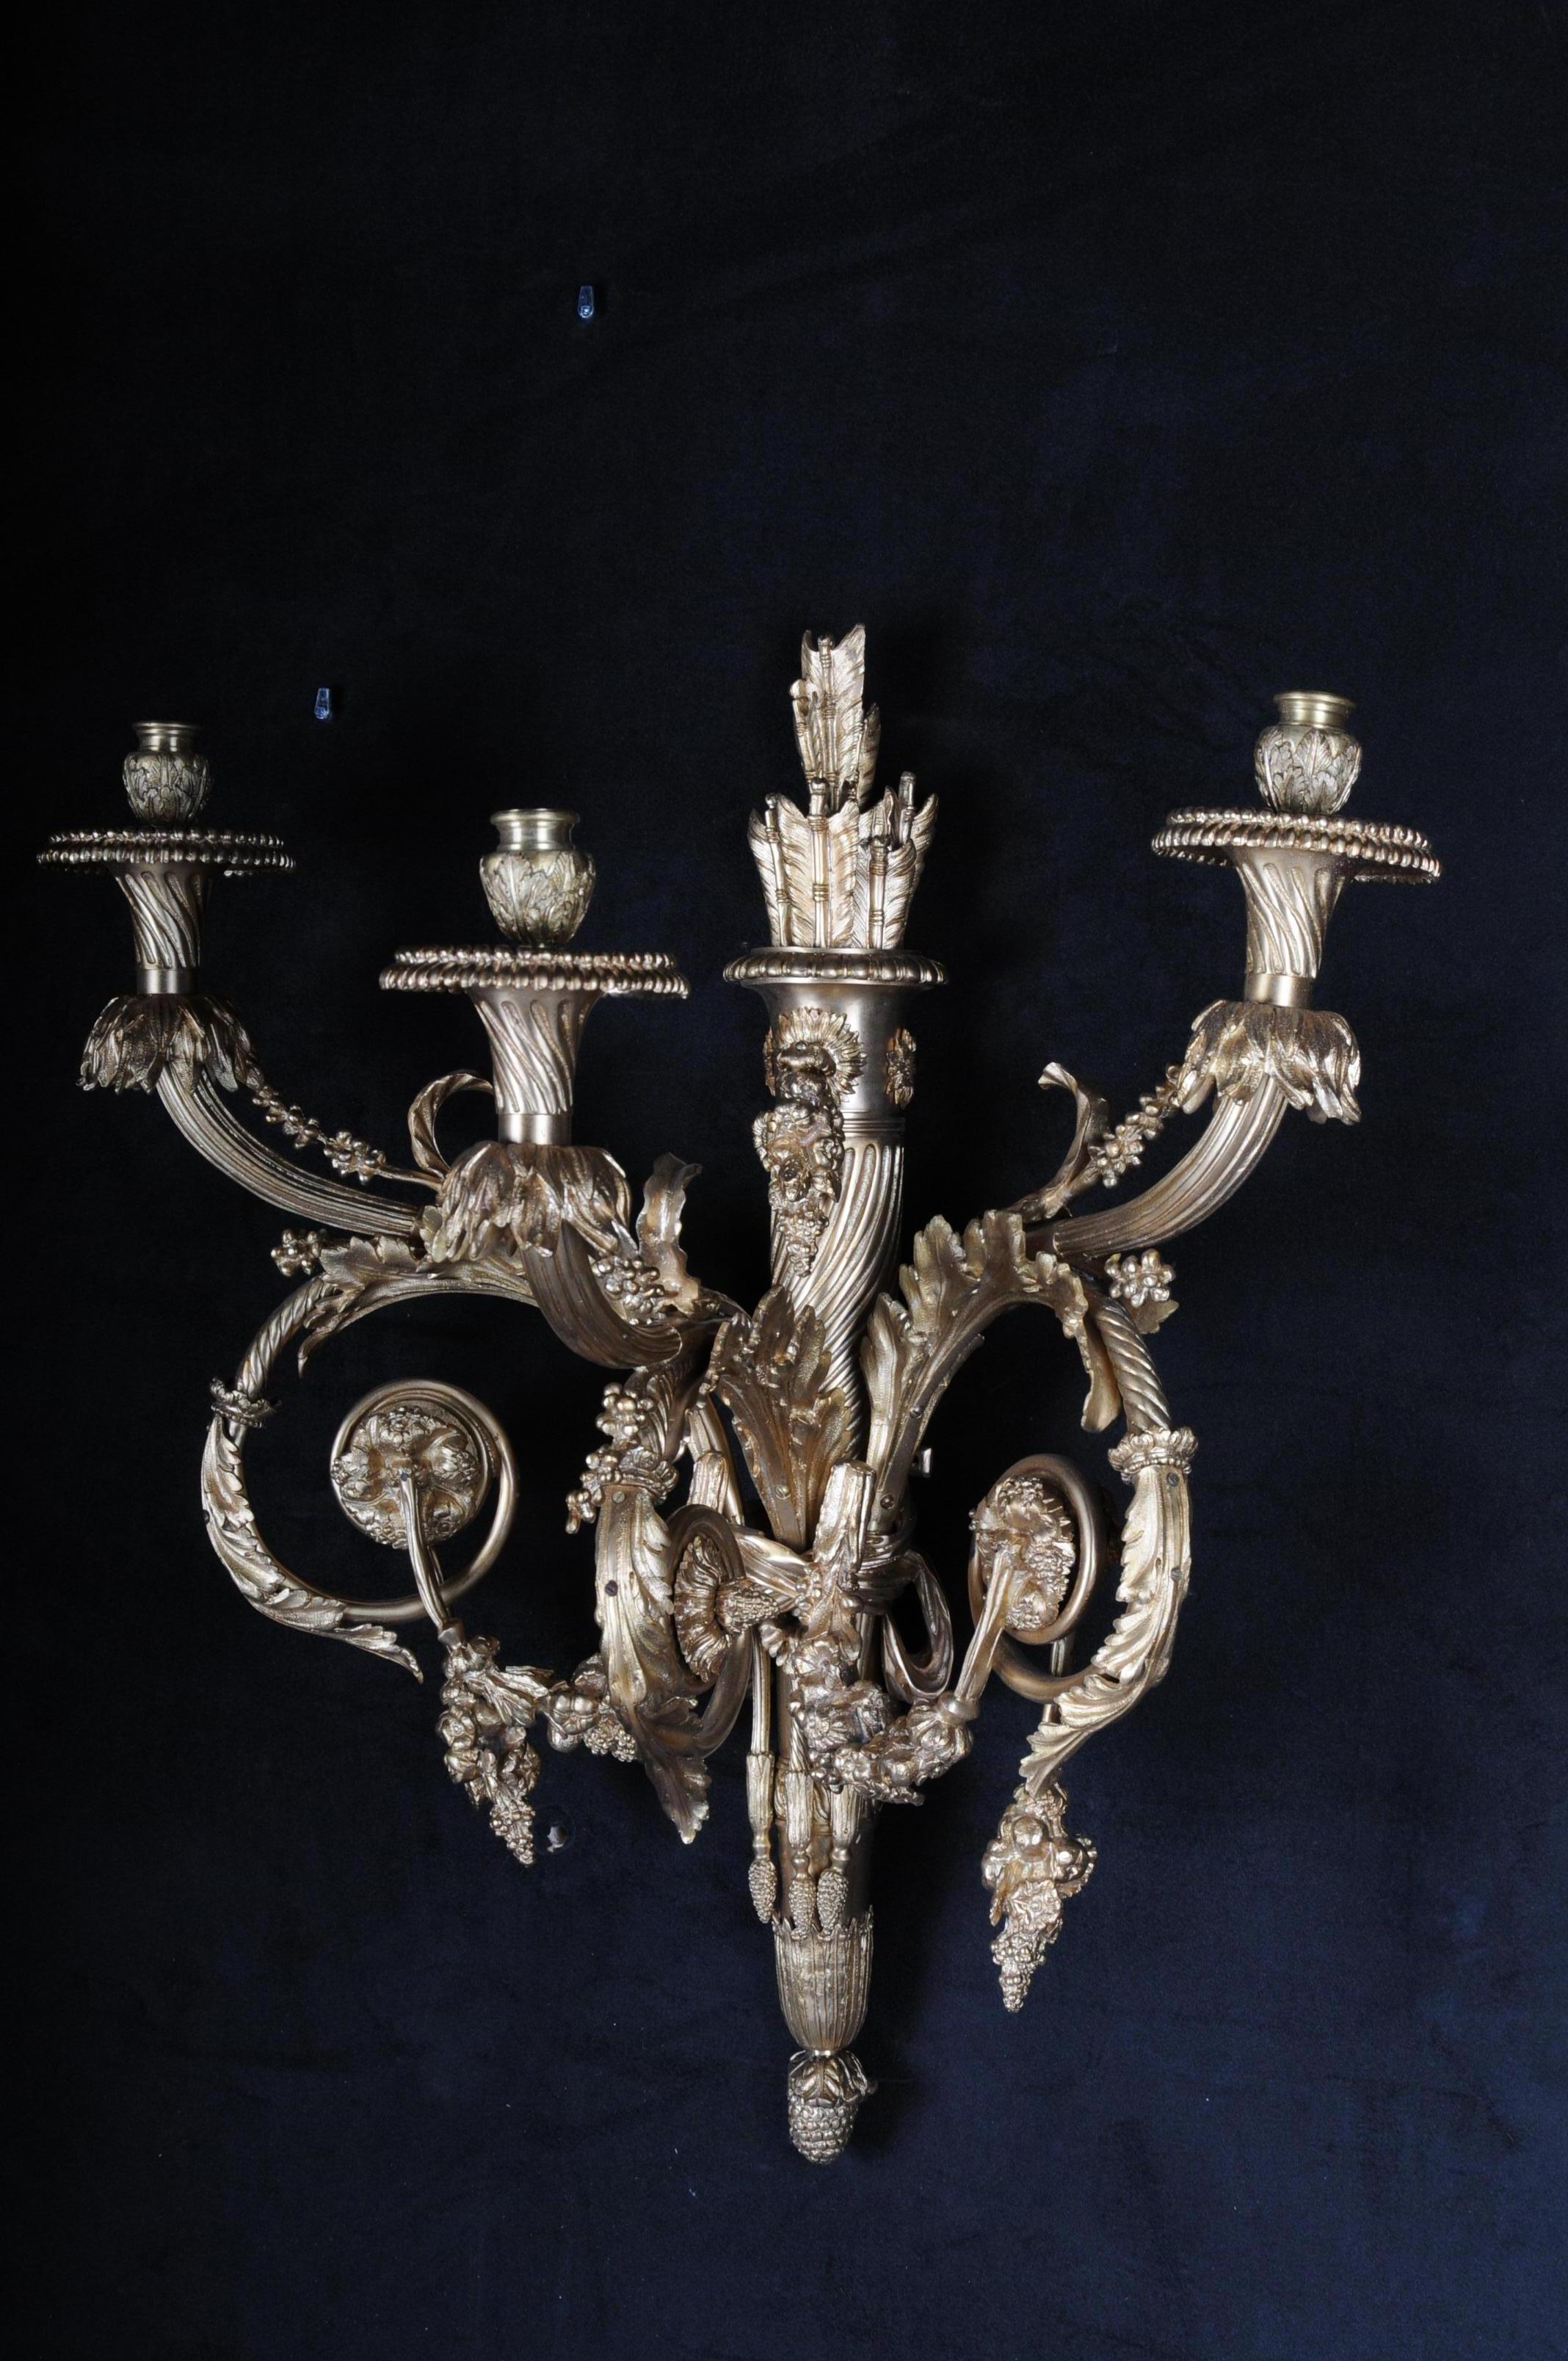 Exceptional finely chased and cast bronze. Conically ascending column shaft starting from 3 acanthus-like curved lighthouses. Vase-shaped grommets on a domed grommet.
The entire candlestick is made in a very elaborate handcraft. This model is one